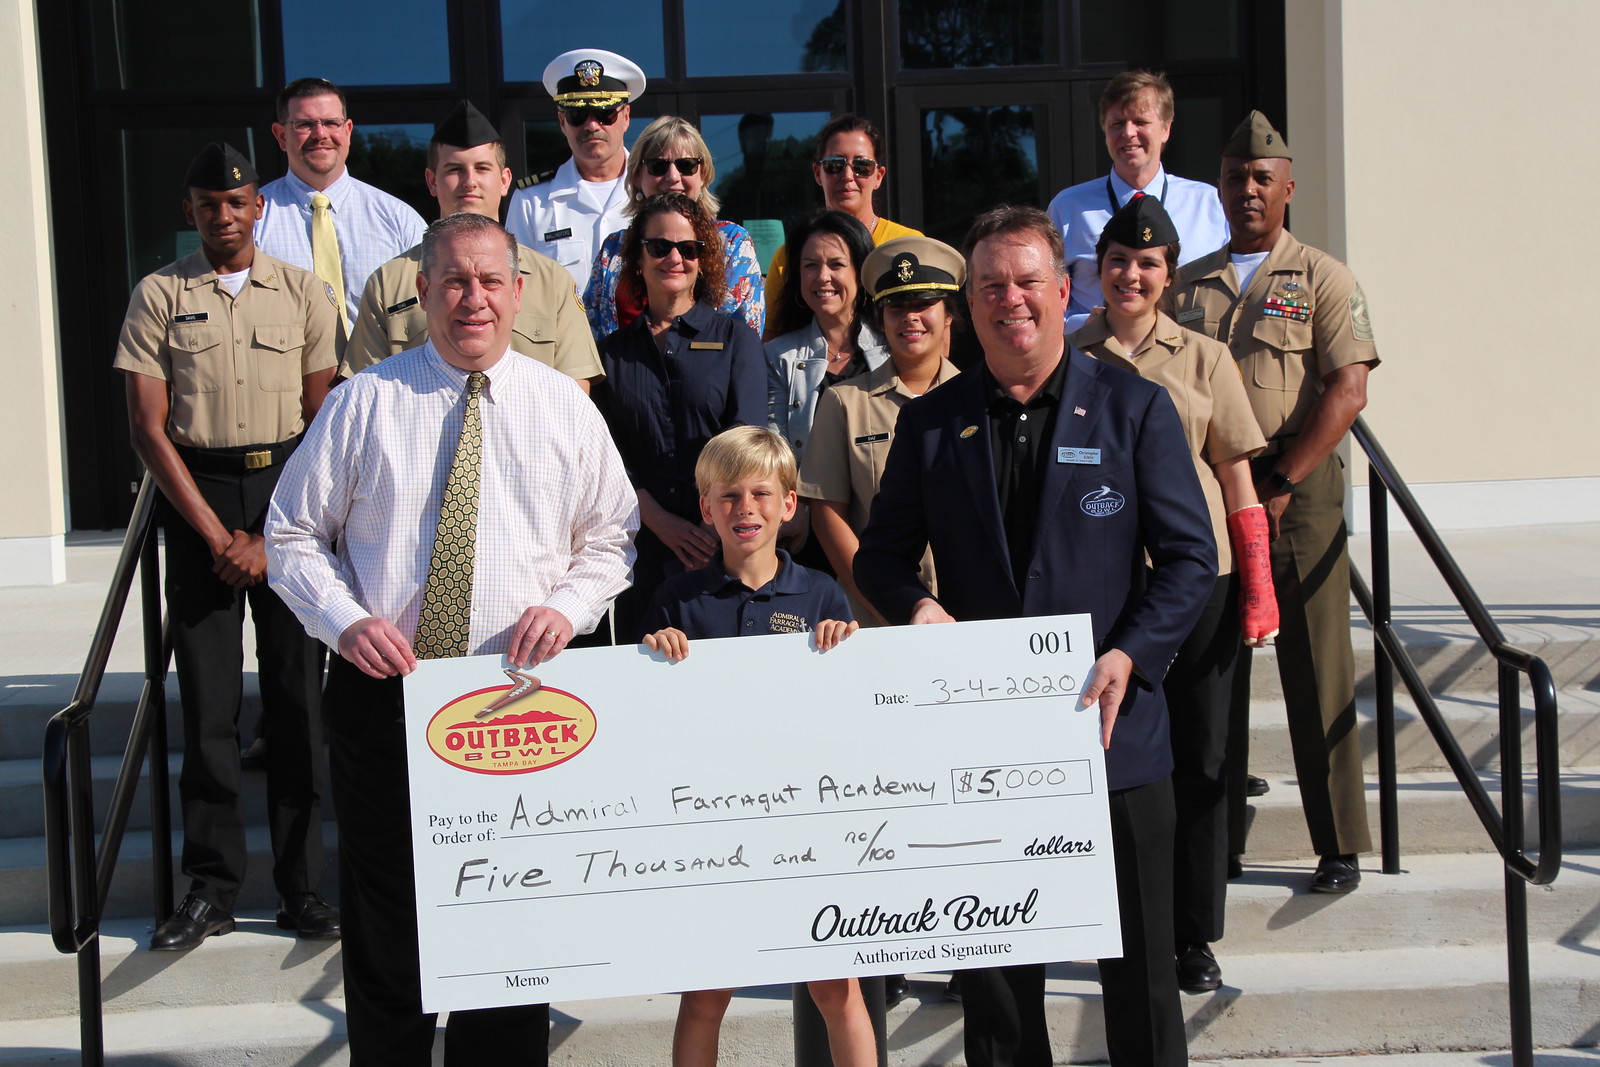 Admiral Farragut Academy awarded $5,000 by The Outback Bowl ...